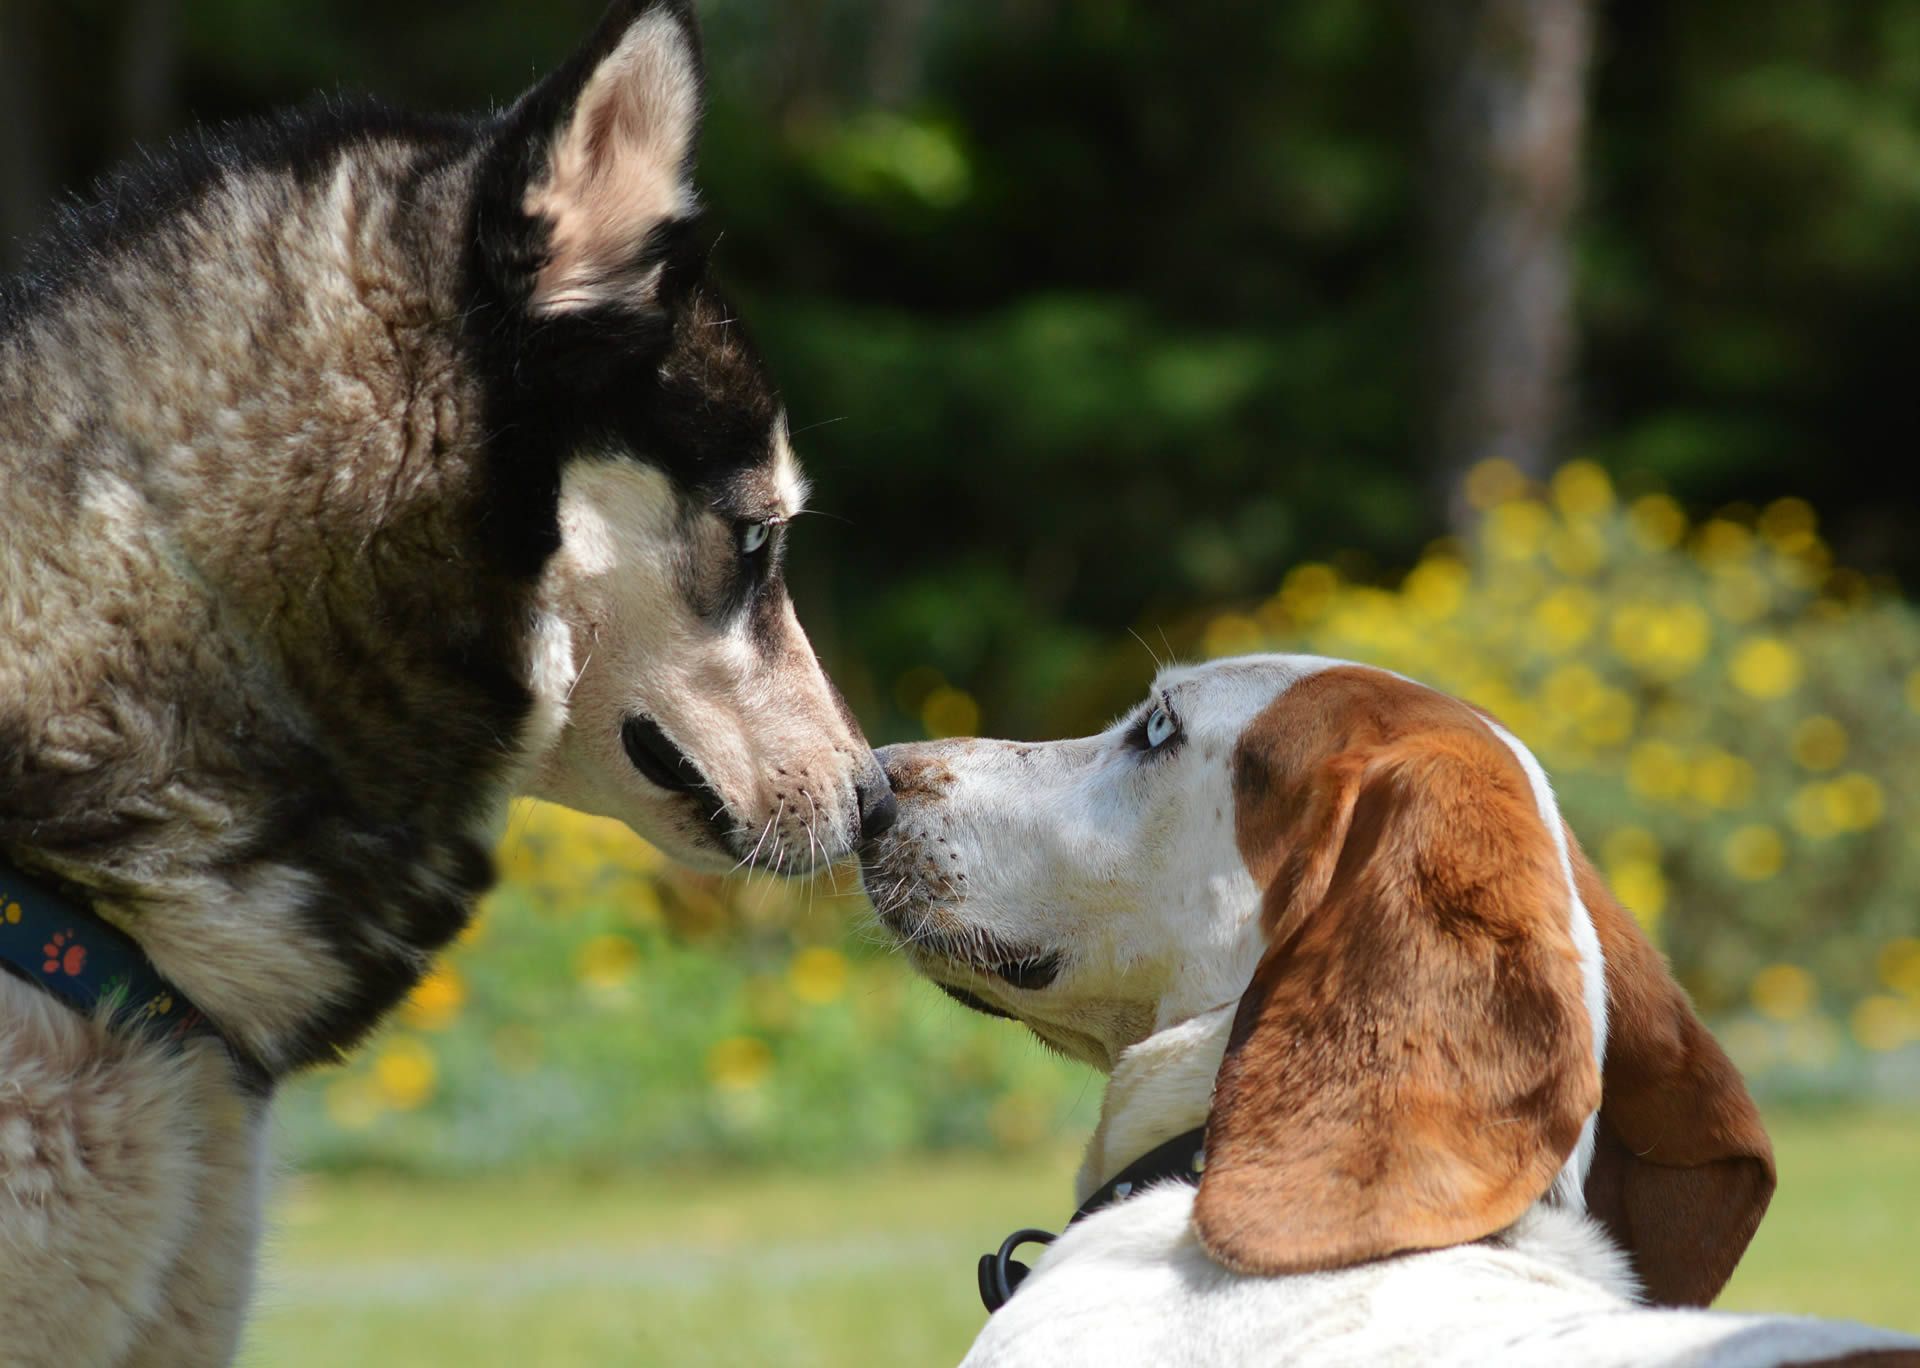 Natural remedies for dog reactivity and aggression